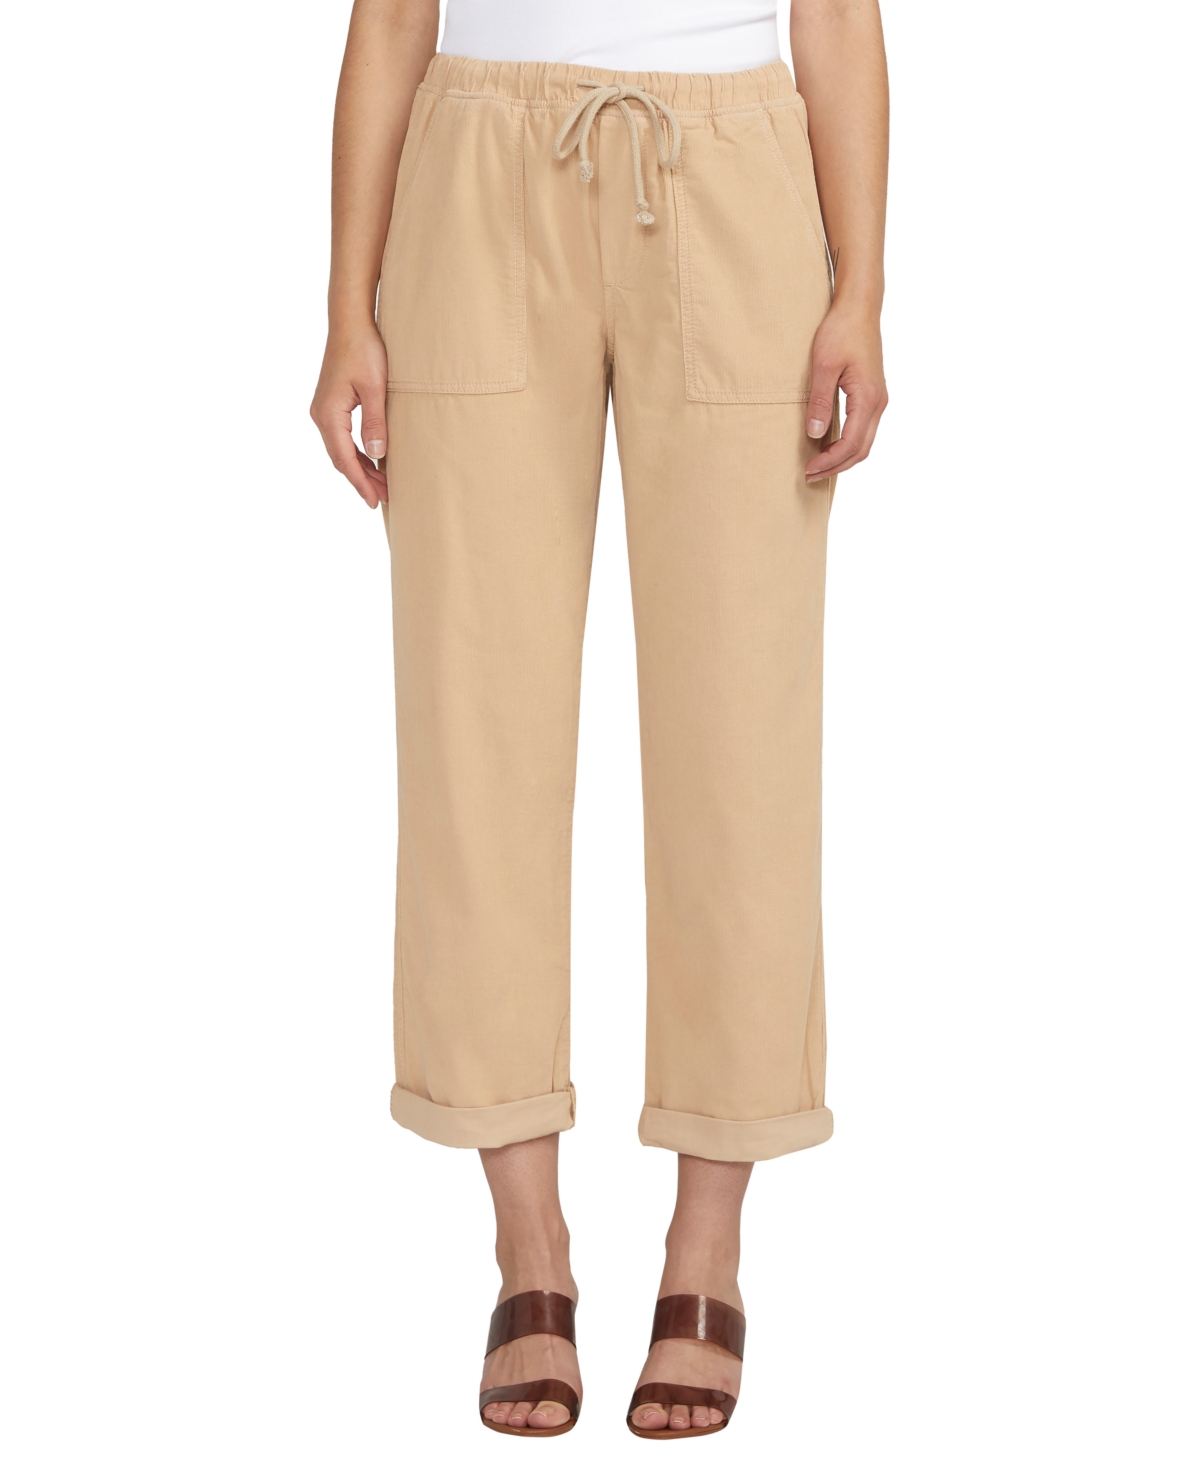 Women's Relaxed Drawstring Pants - Olive